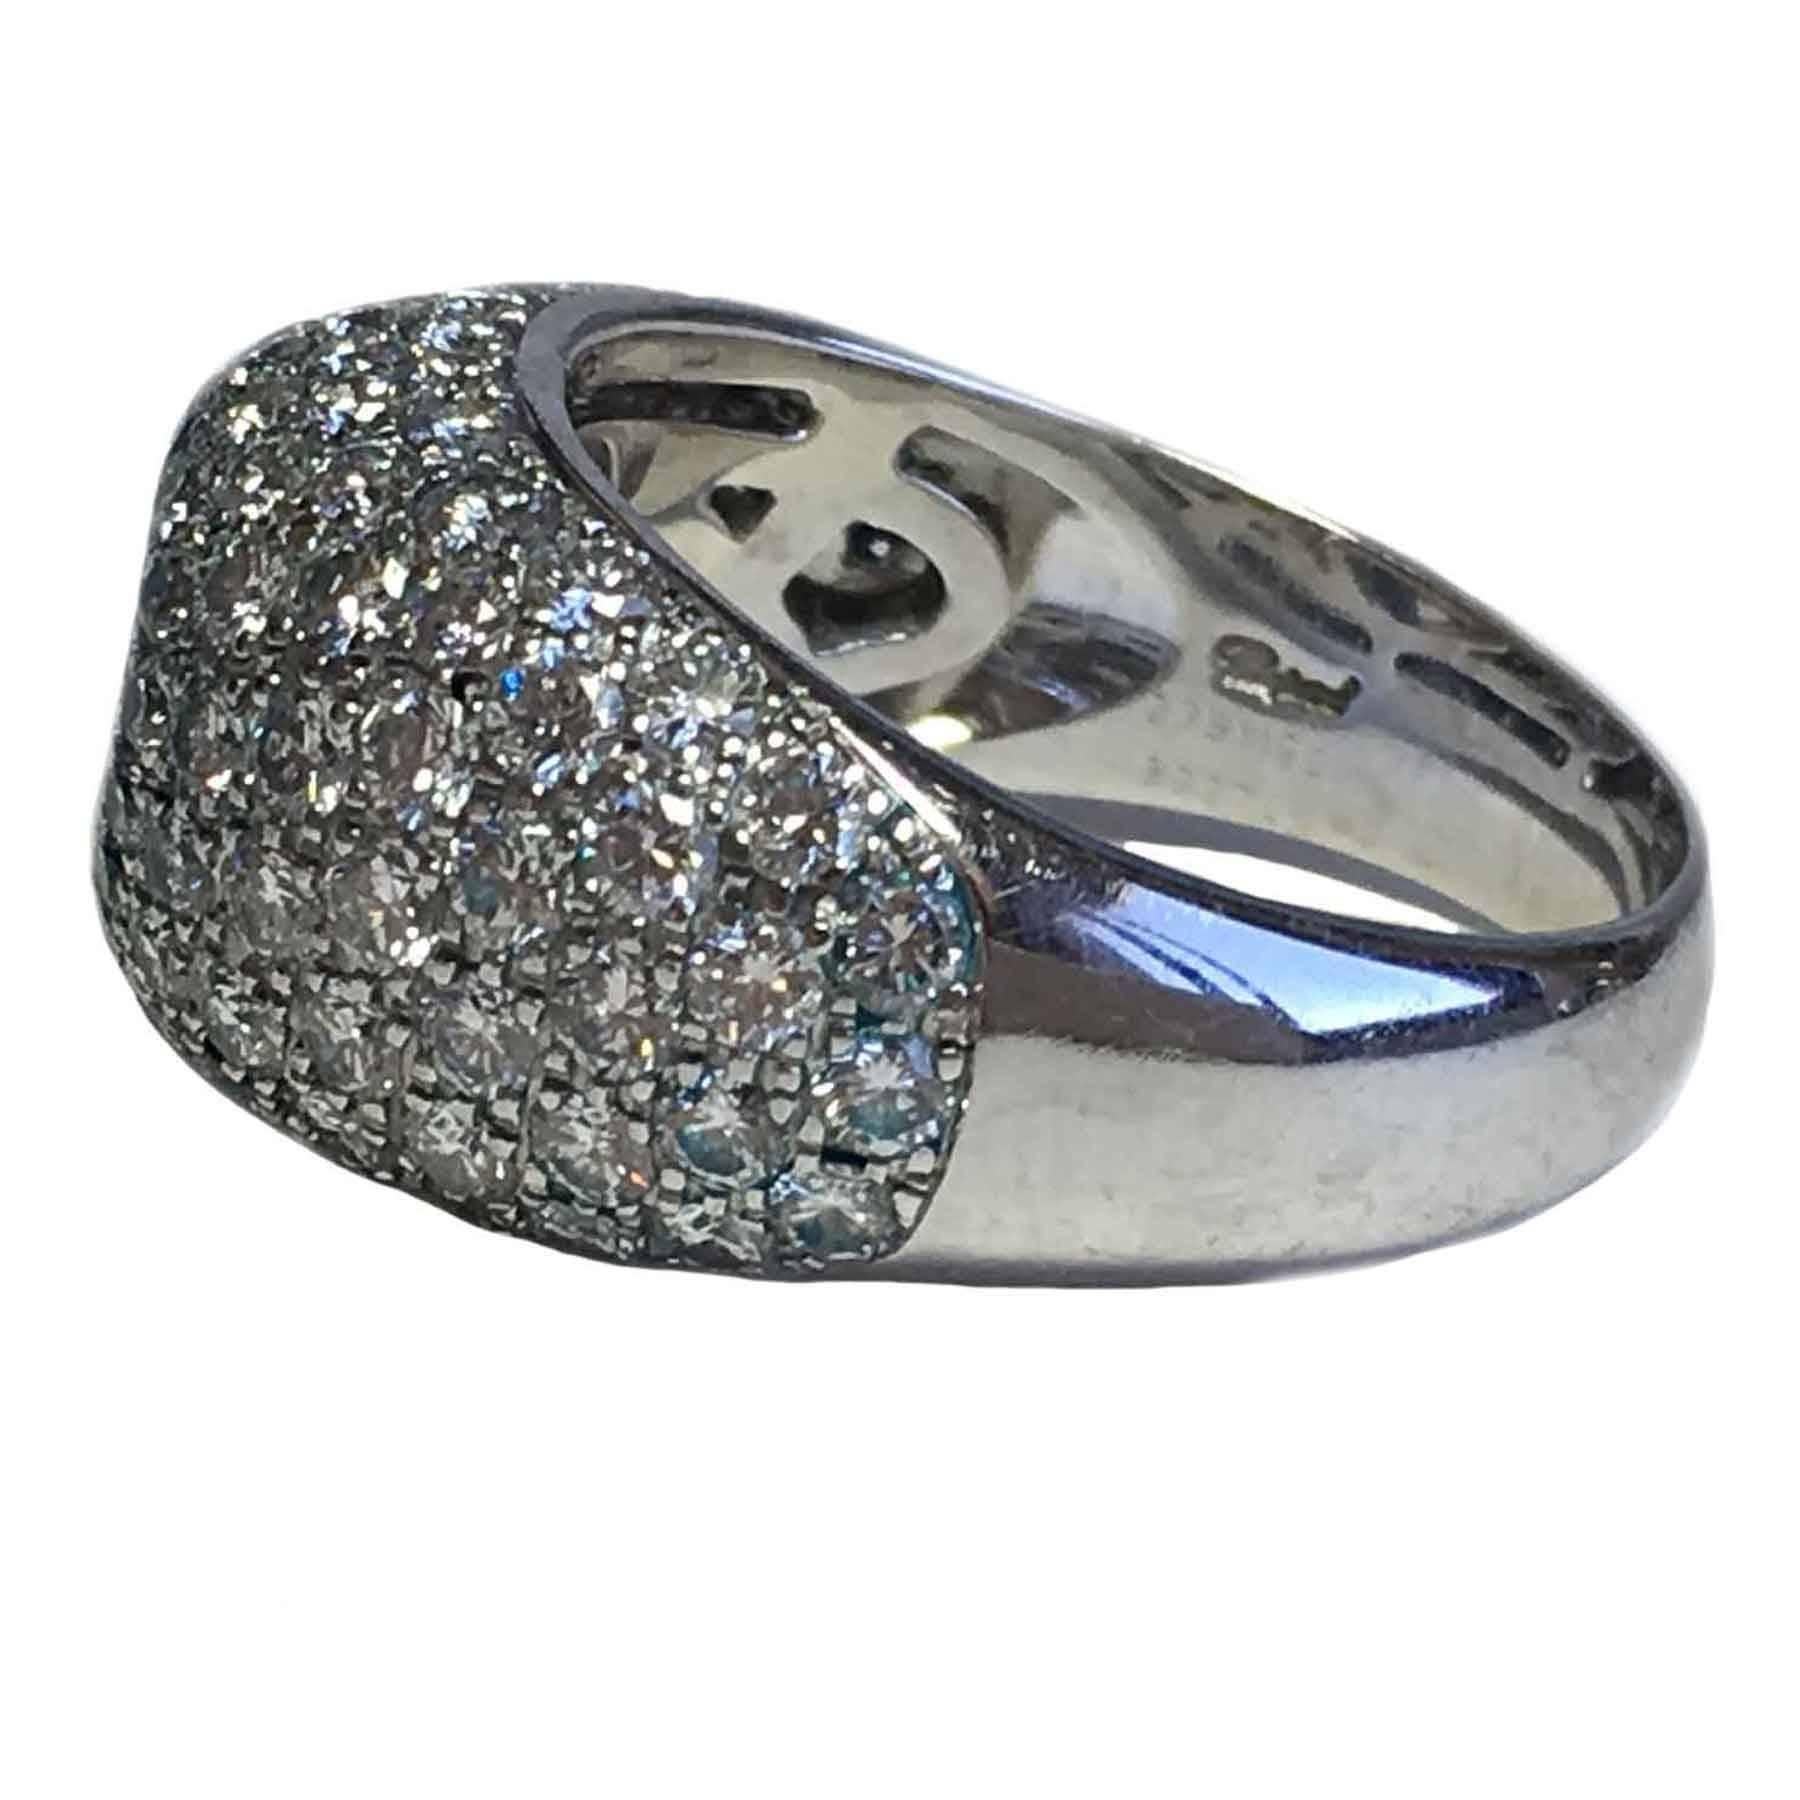 Women's CHOPARD Ring in 18K White Gold set with Brilliant Cut Diamonds Size 56 For Sale